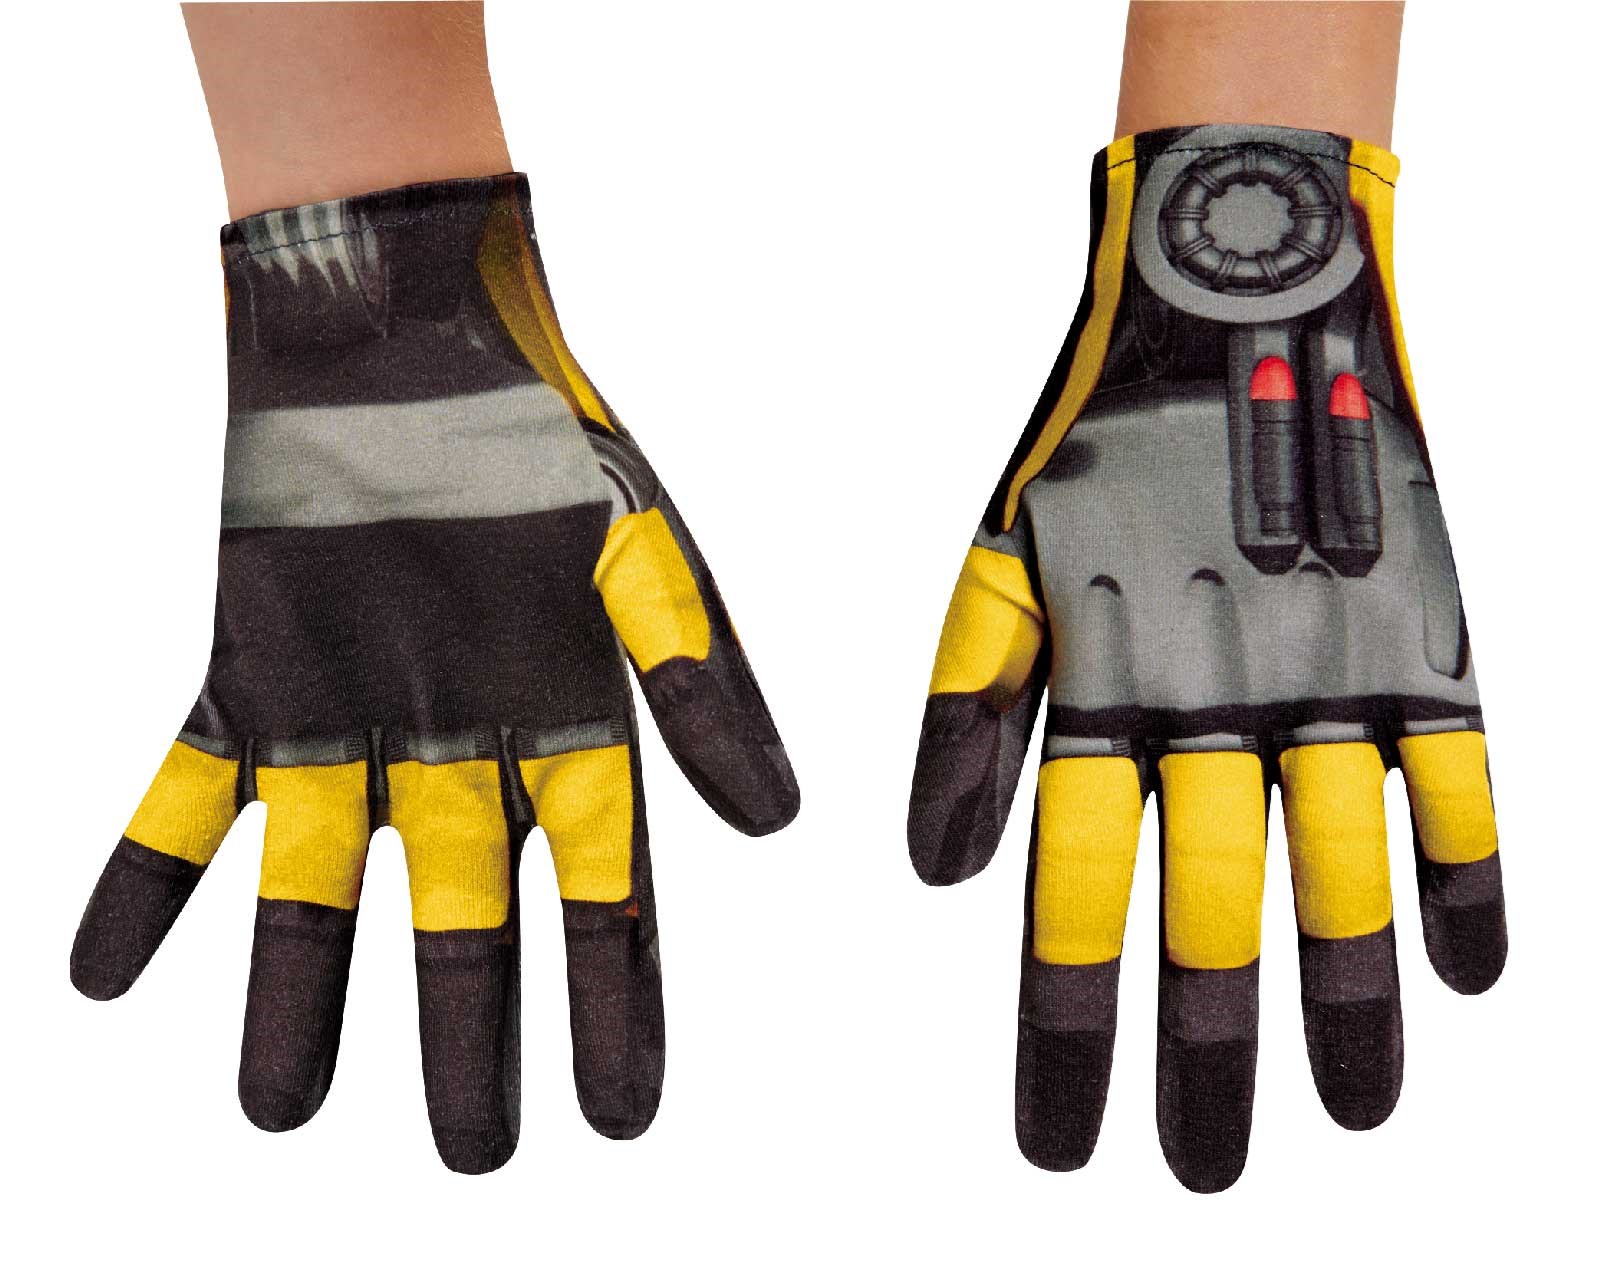 Transformers 4 Age of Extinction Bumblebee Child Gloves